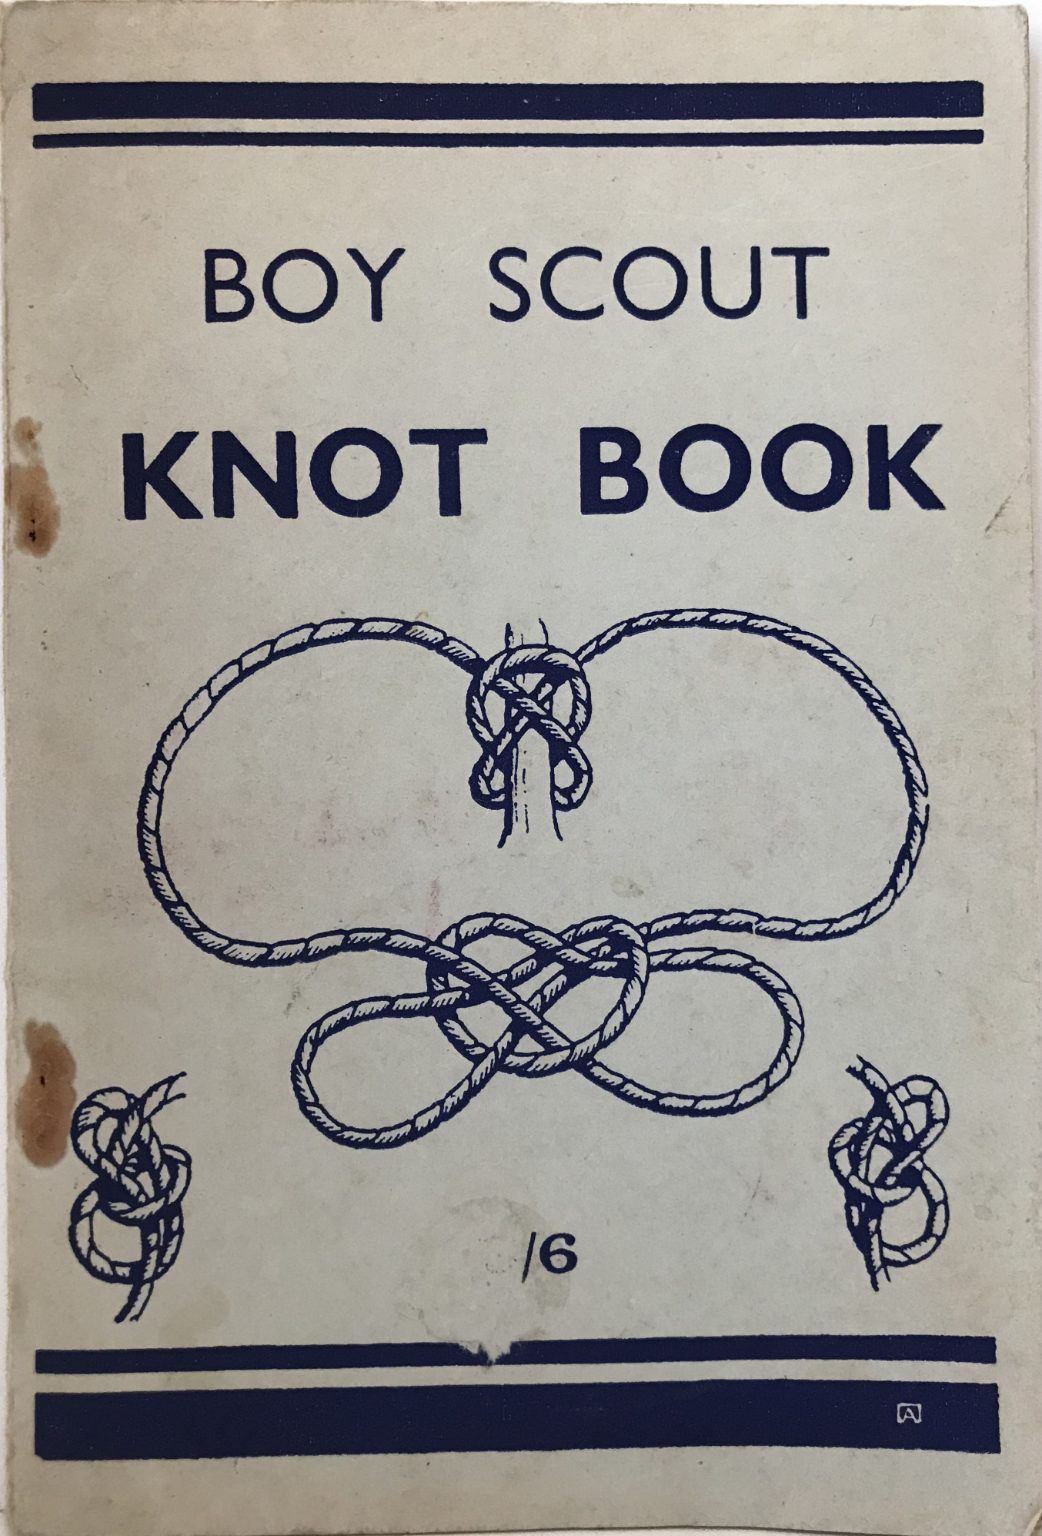 BOY SCOUT KNOT BOOK